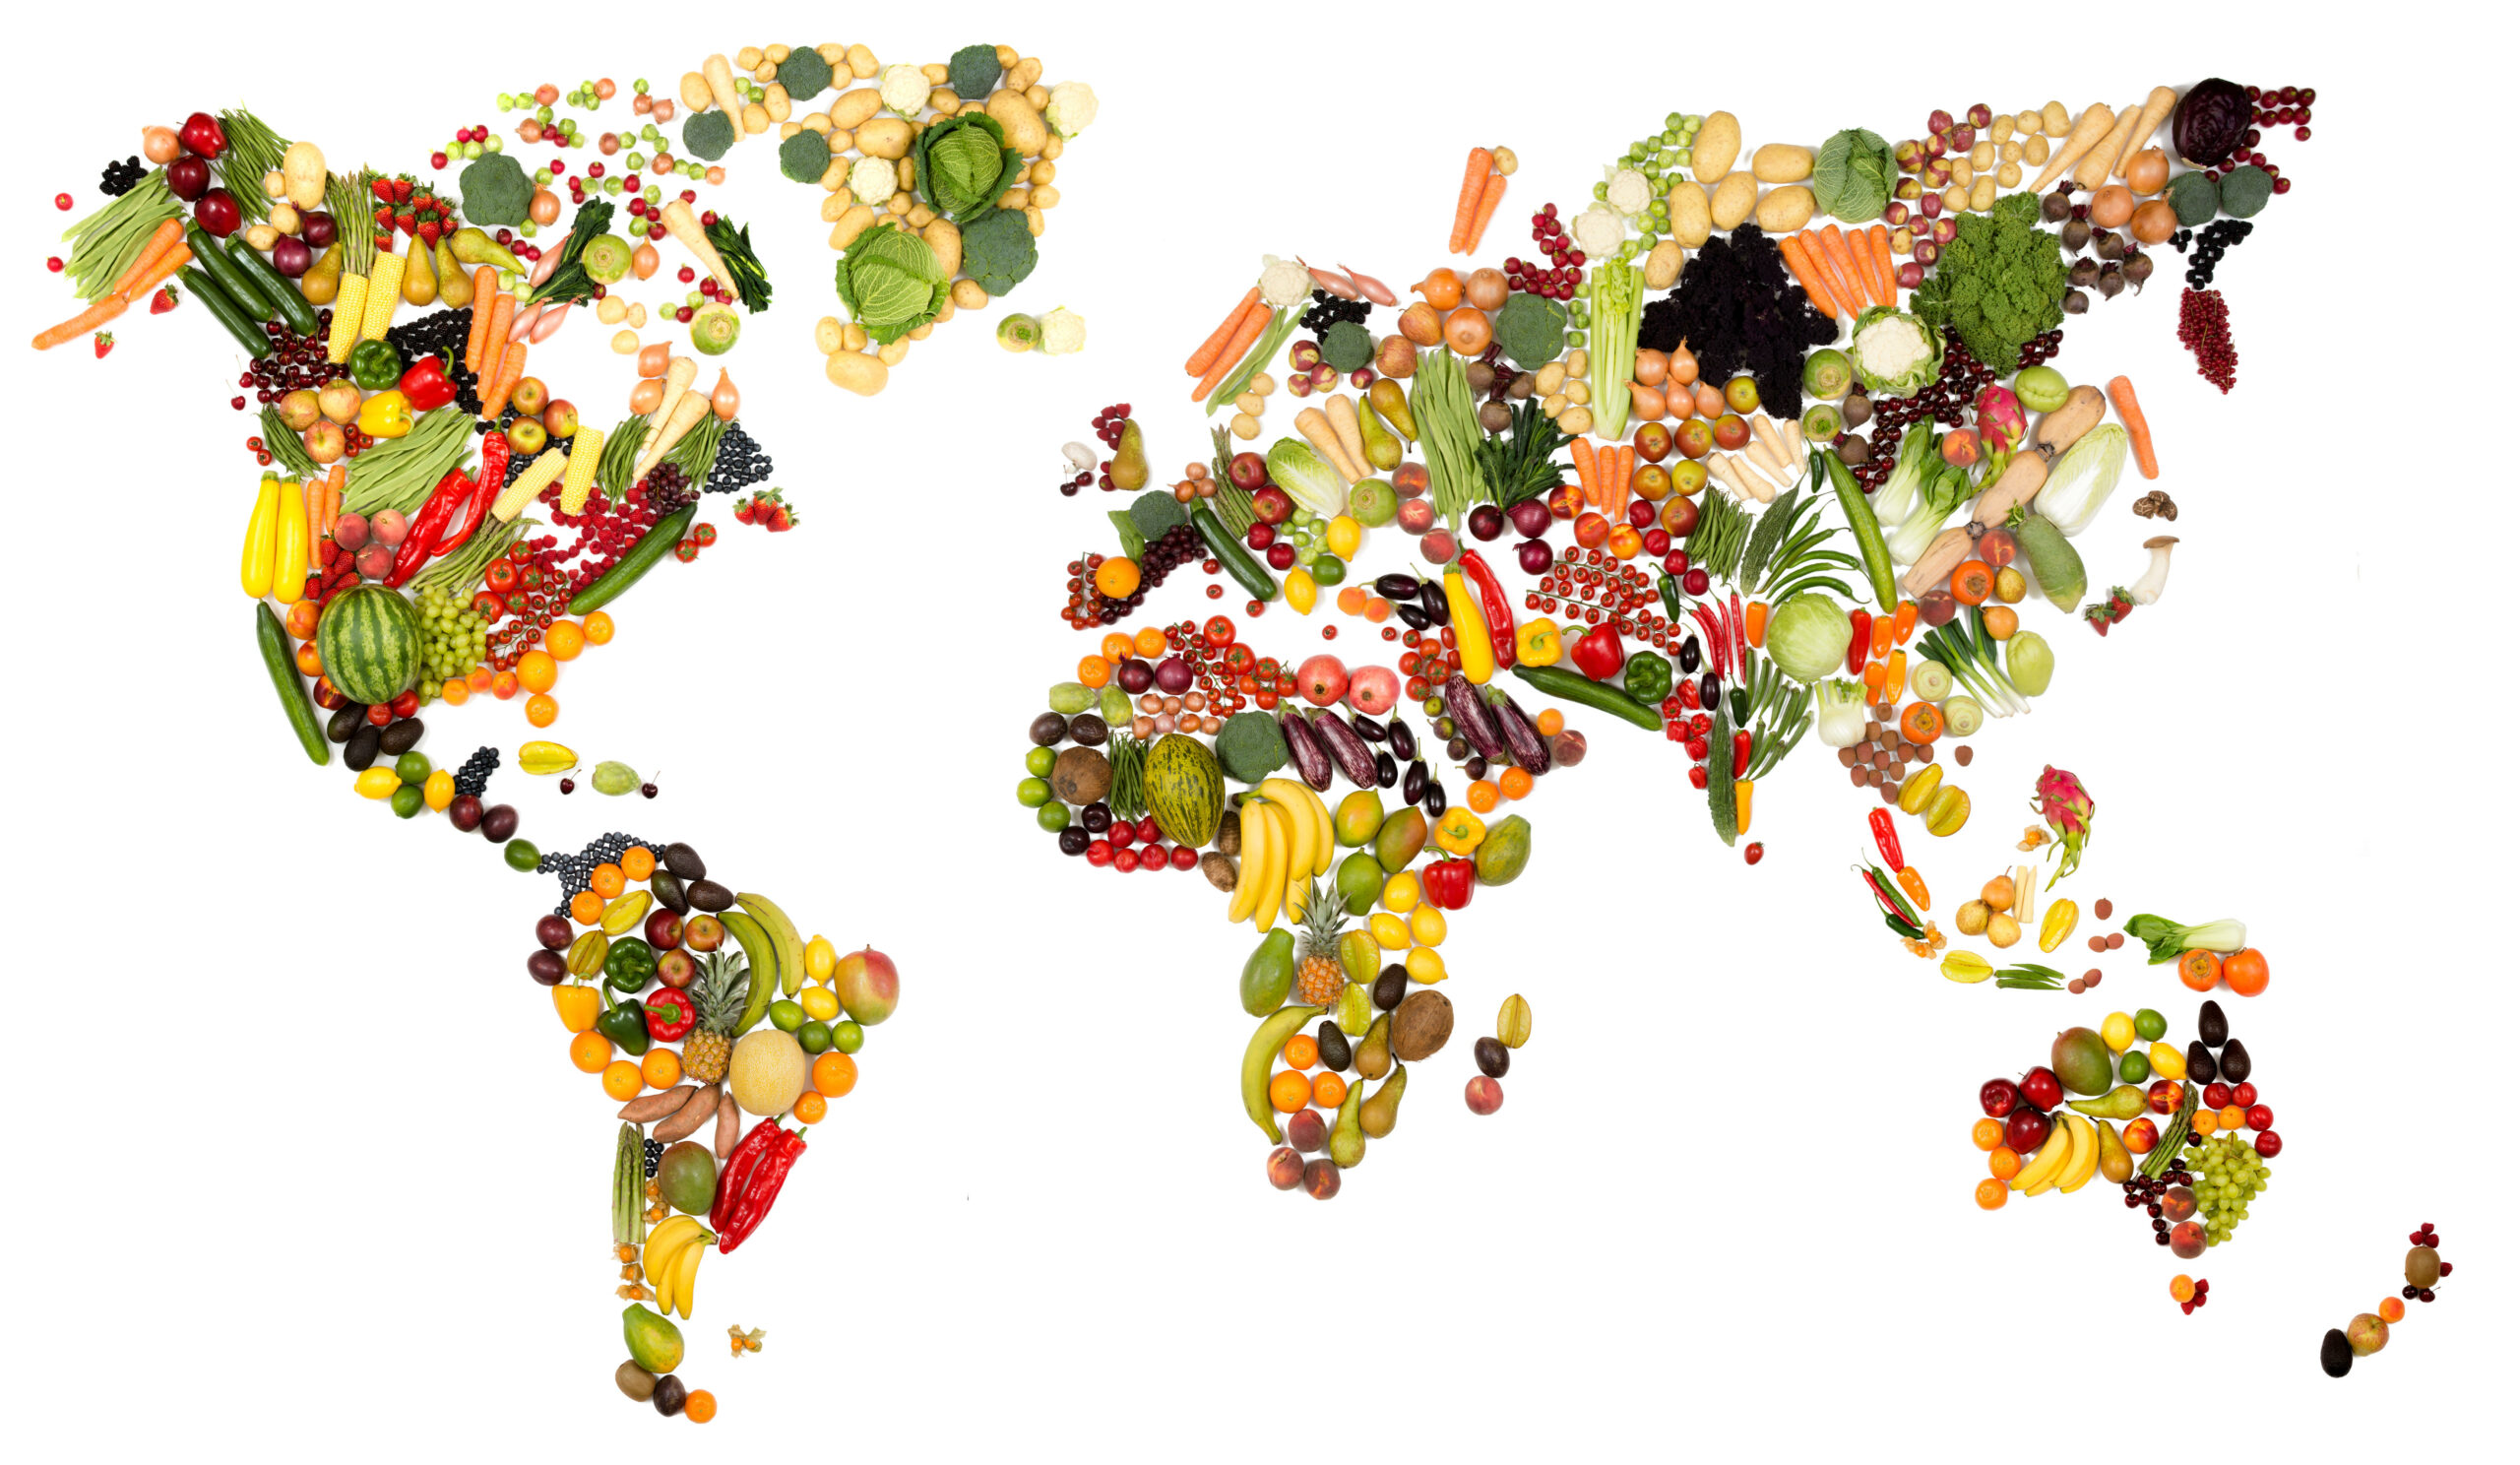 Culinary diversity : Exploring the World of Food